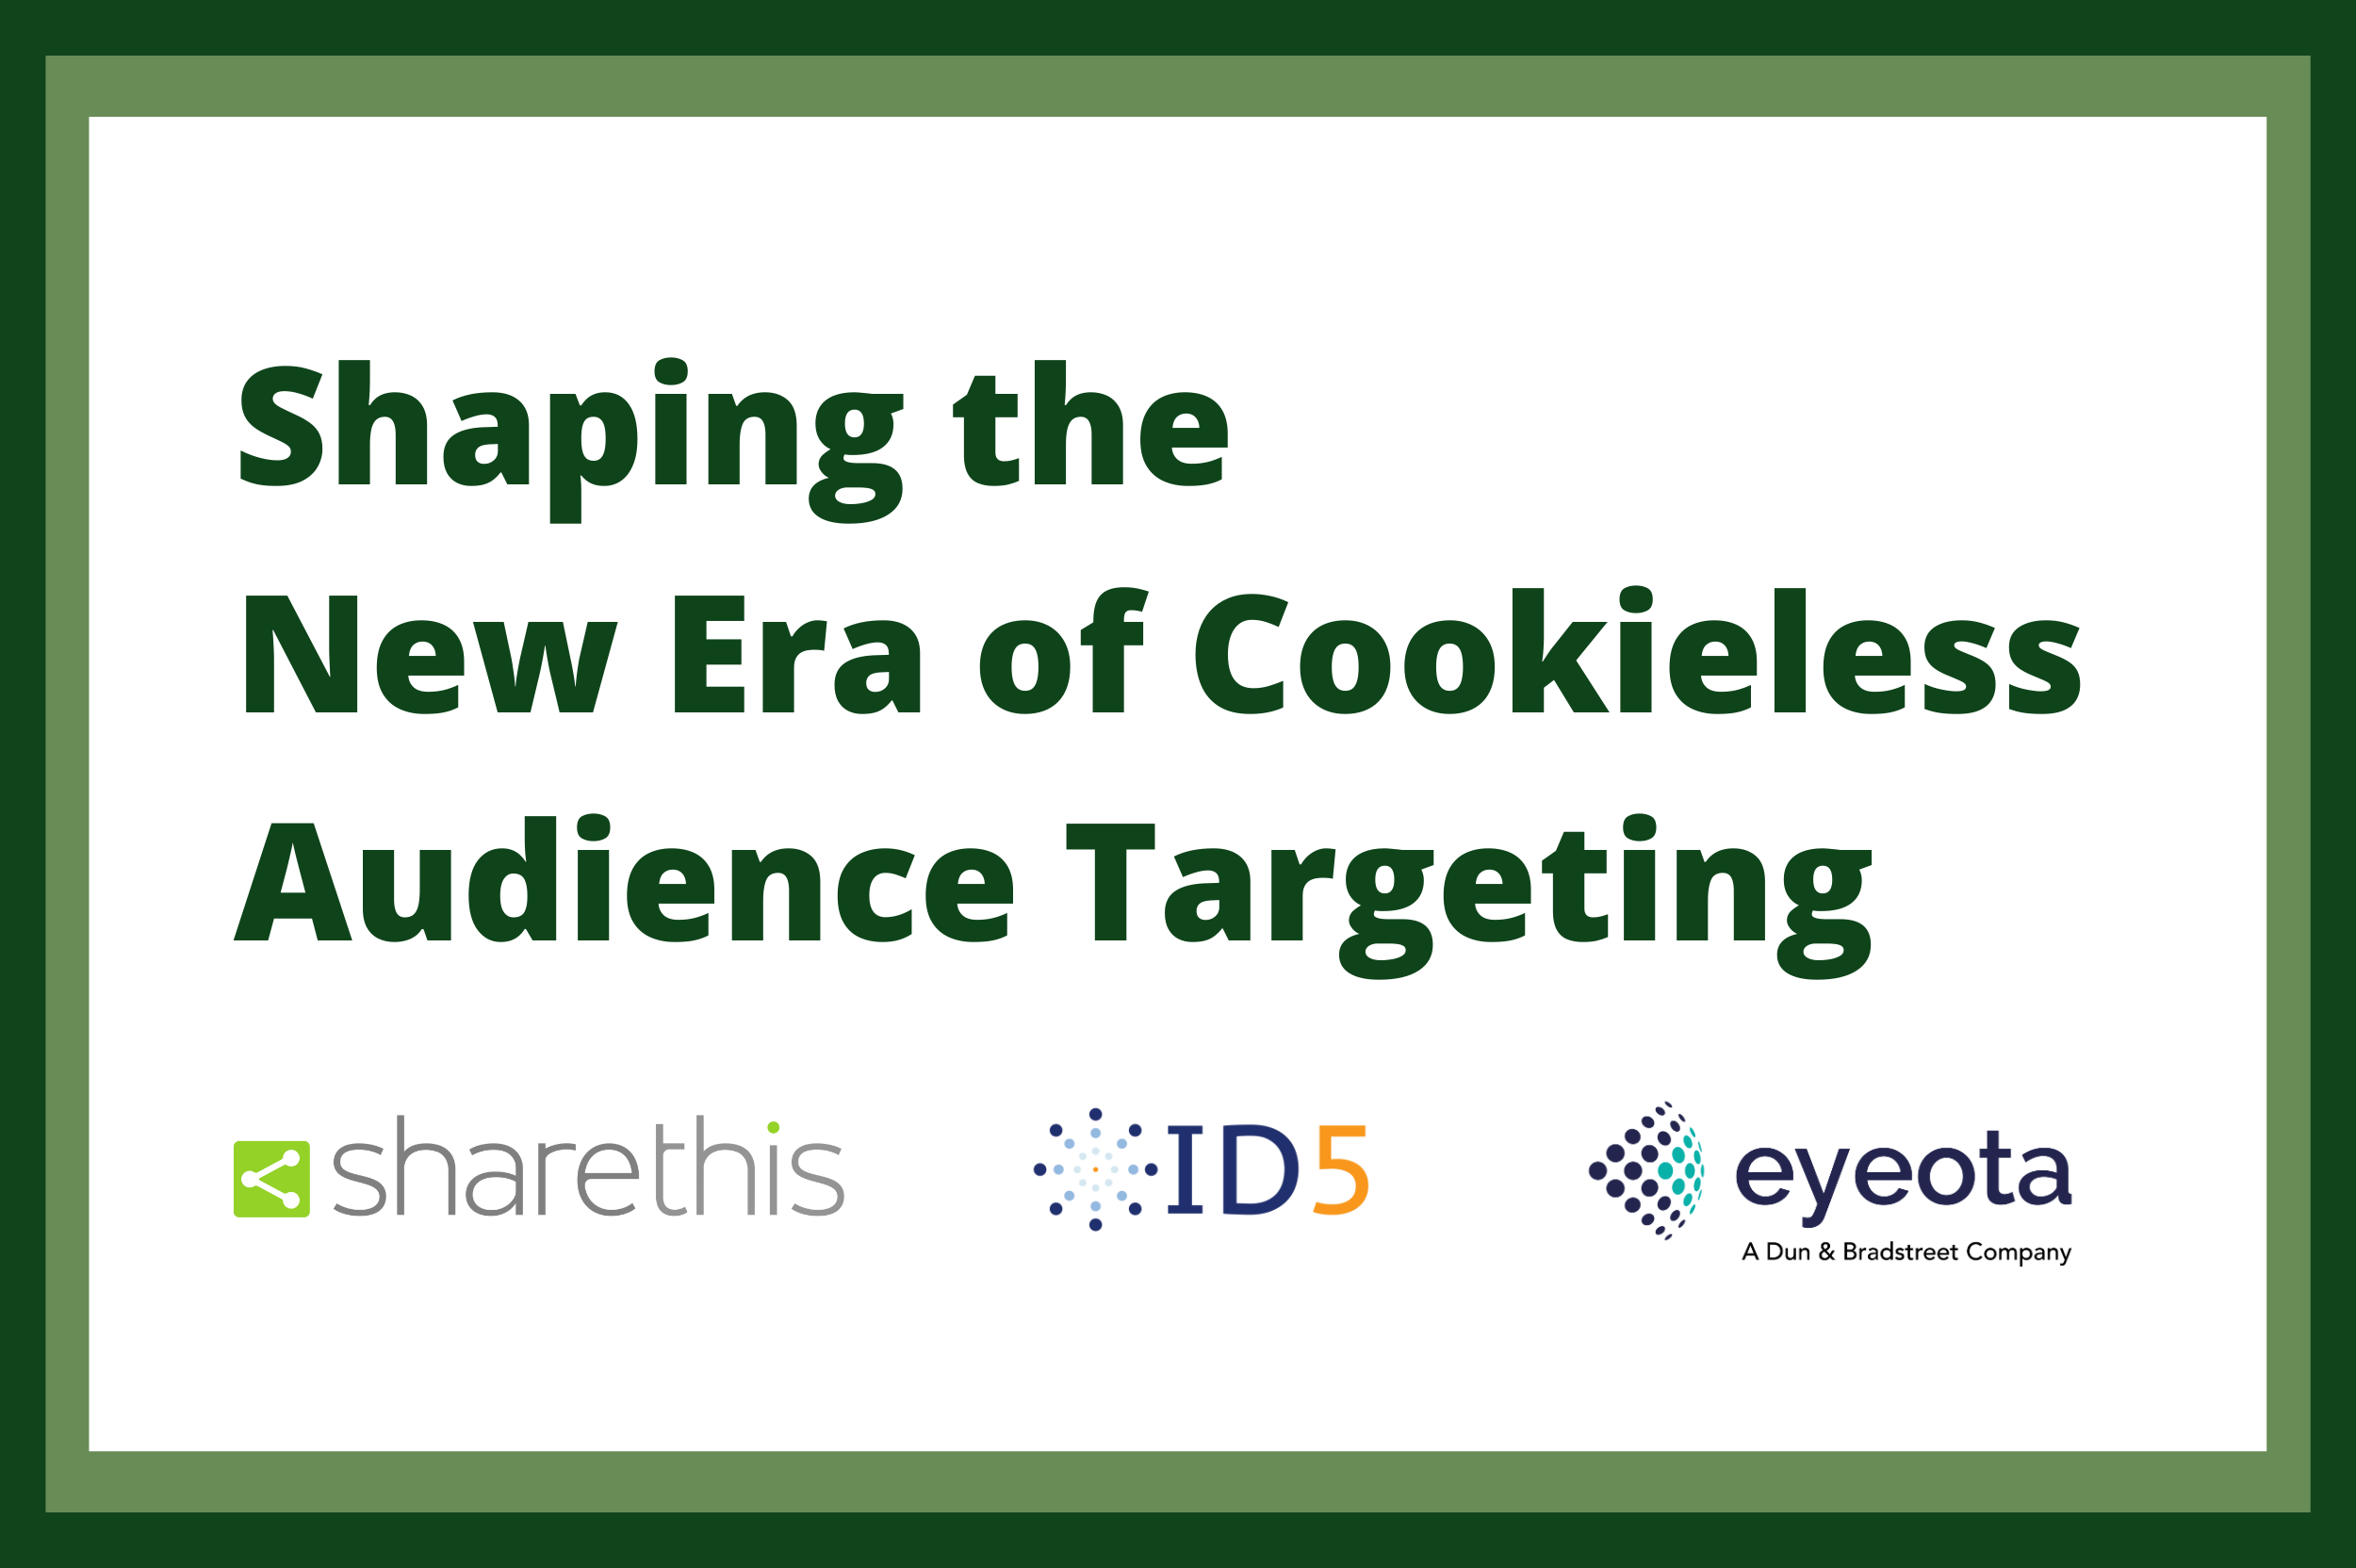 ShareThis, Eyeota, and ID5 Drive the Shift to Cookieless Audience Targeting